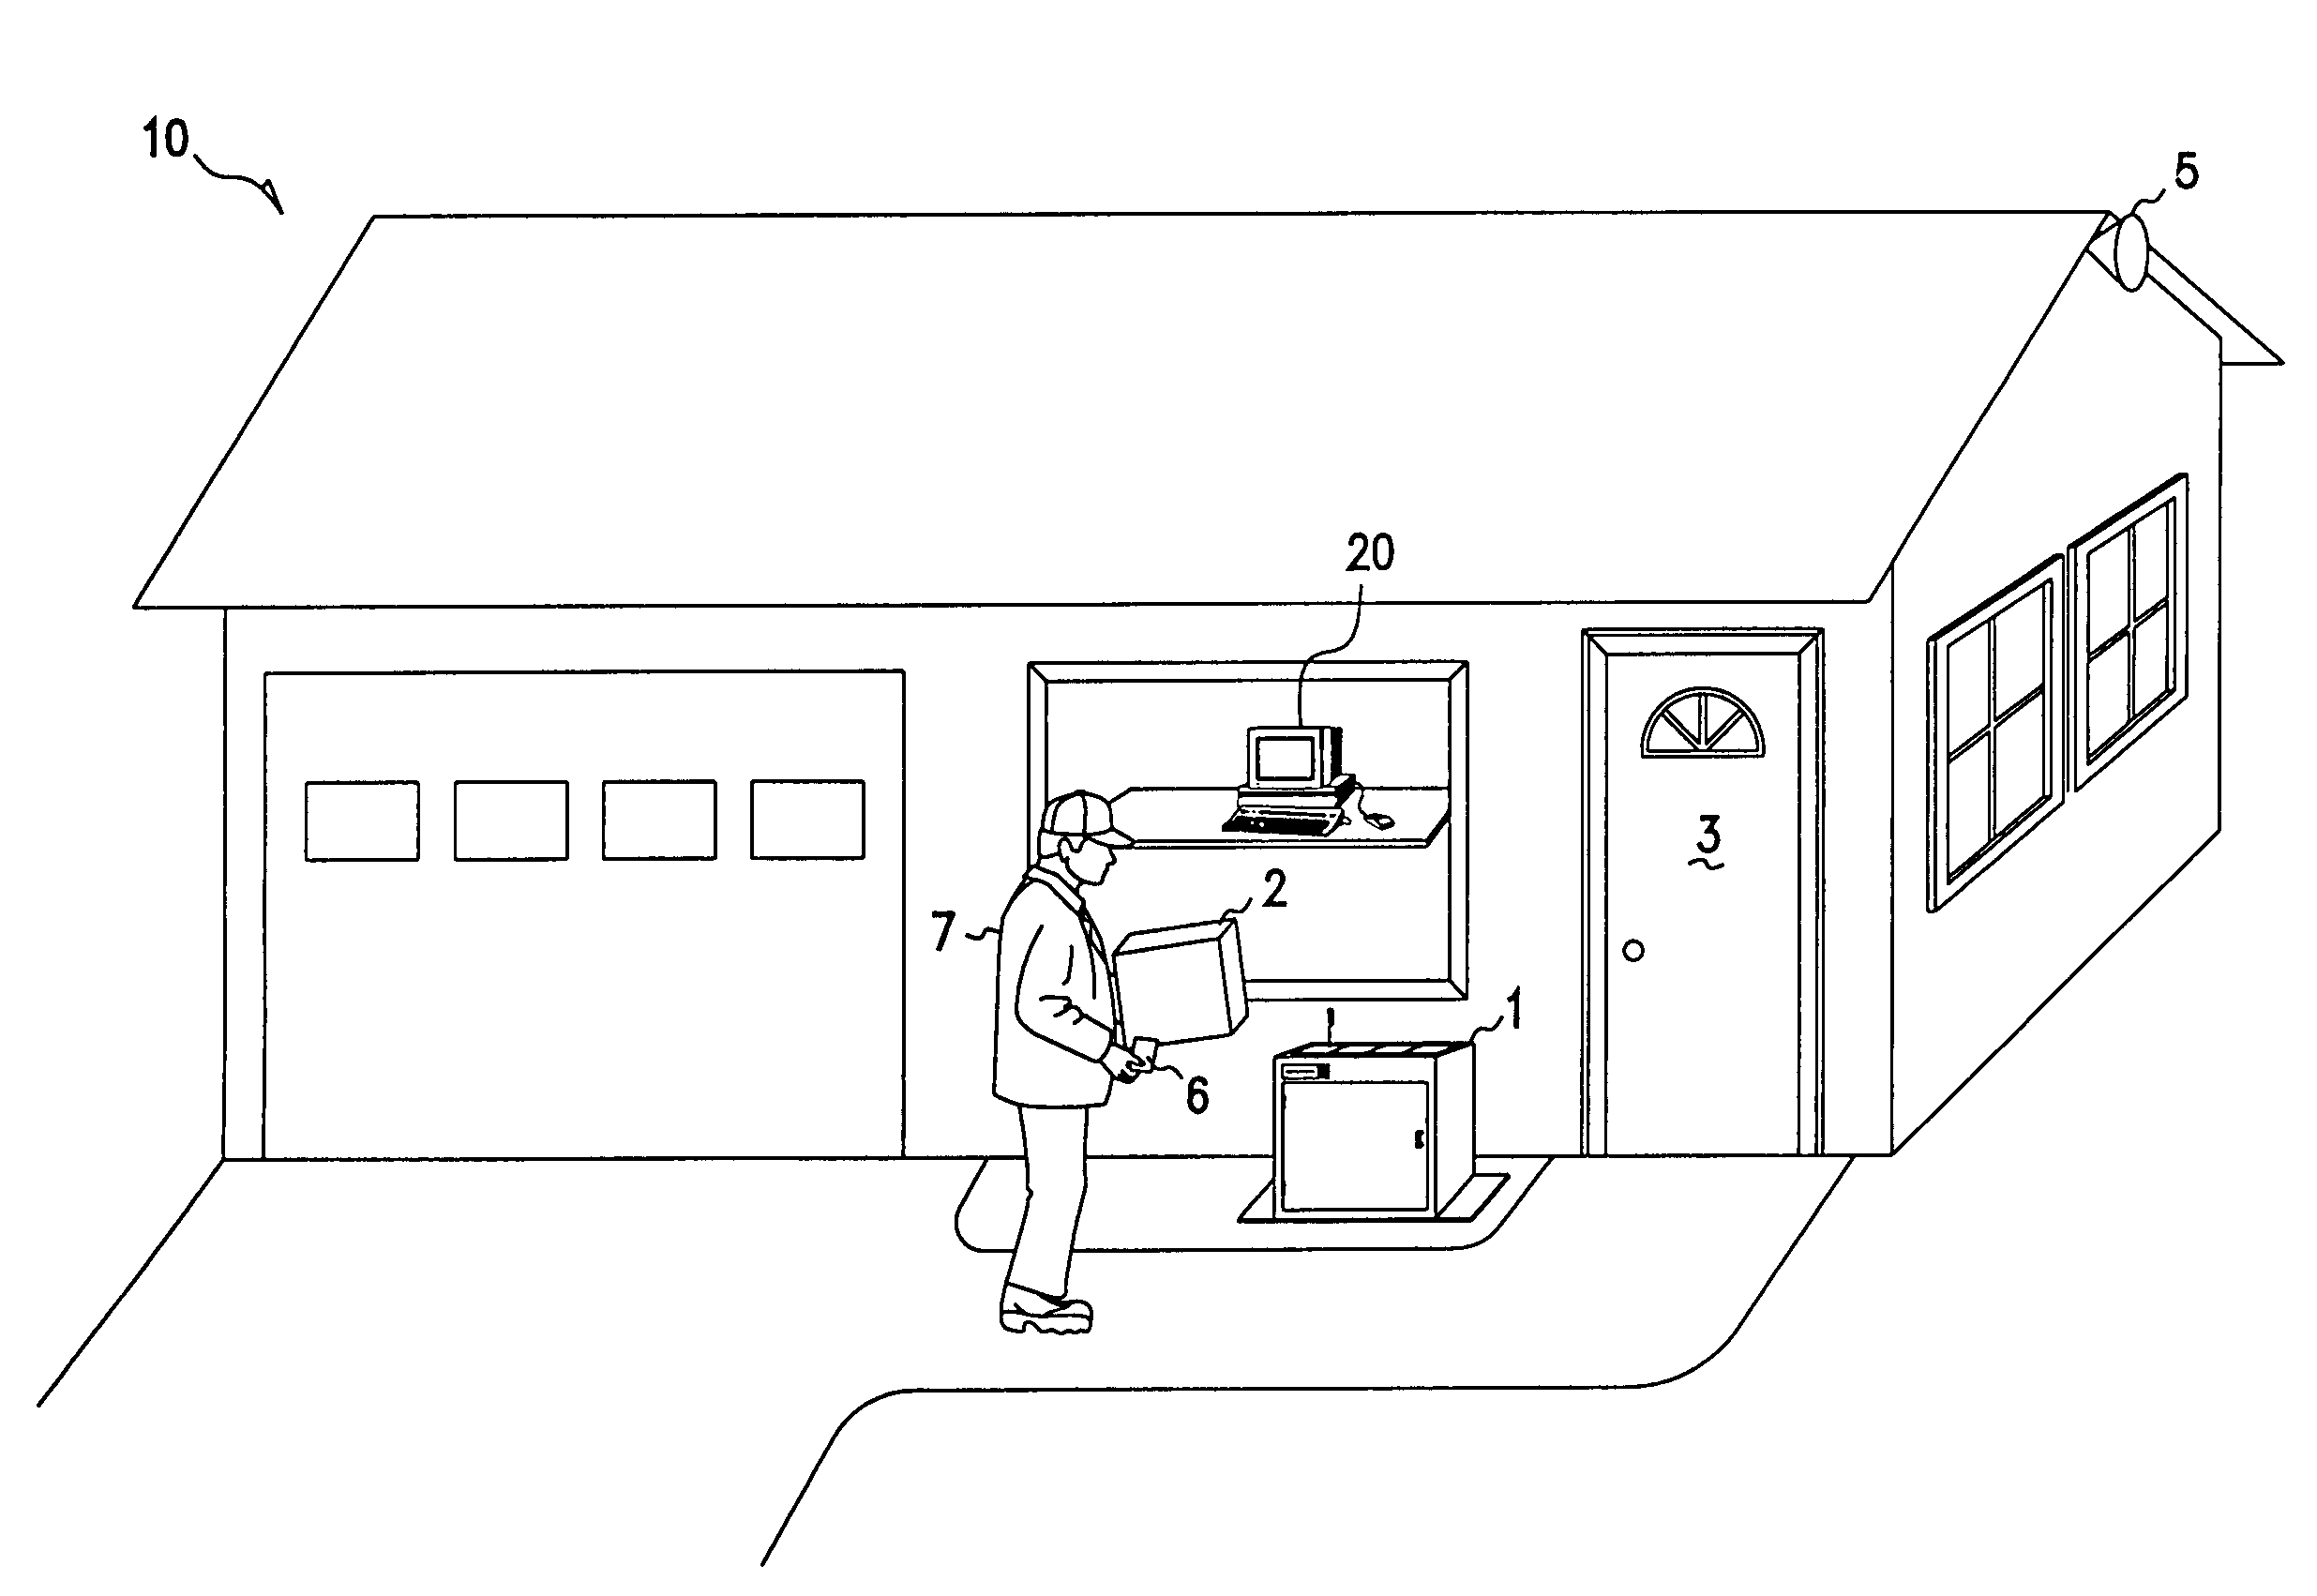 Methods and apparatus for unattended pickups and deliveries